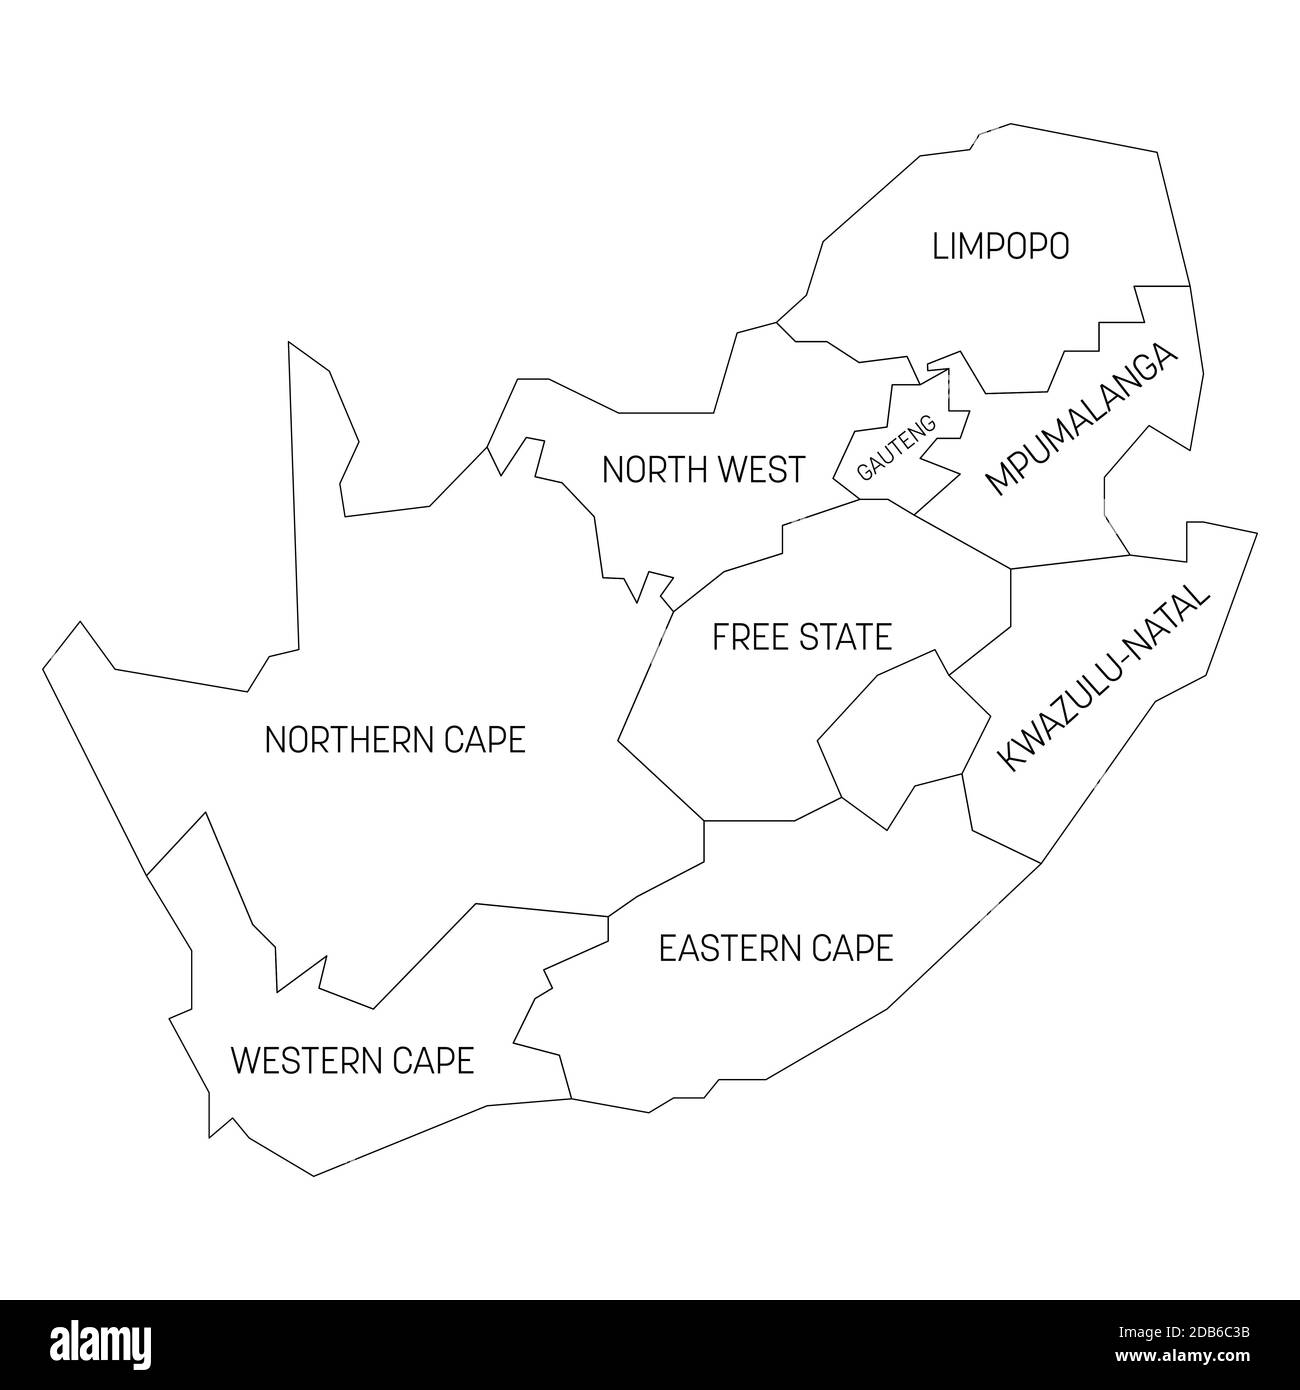 Black outline political map of South Africa, RSA. Administrative divisions - provinces. Simple vector map with labels. Stock Vector